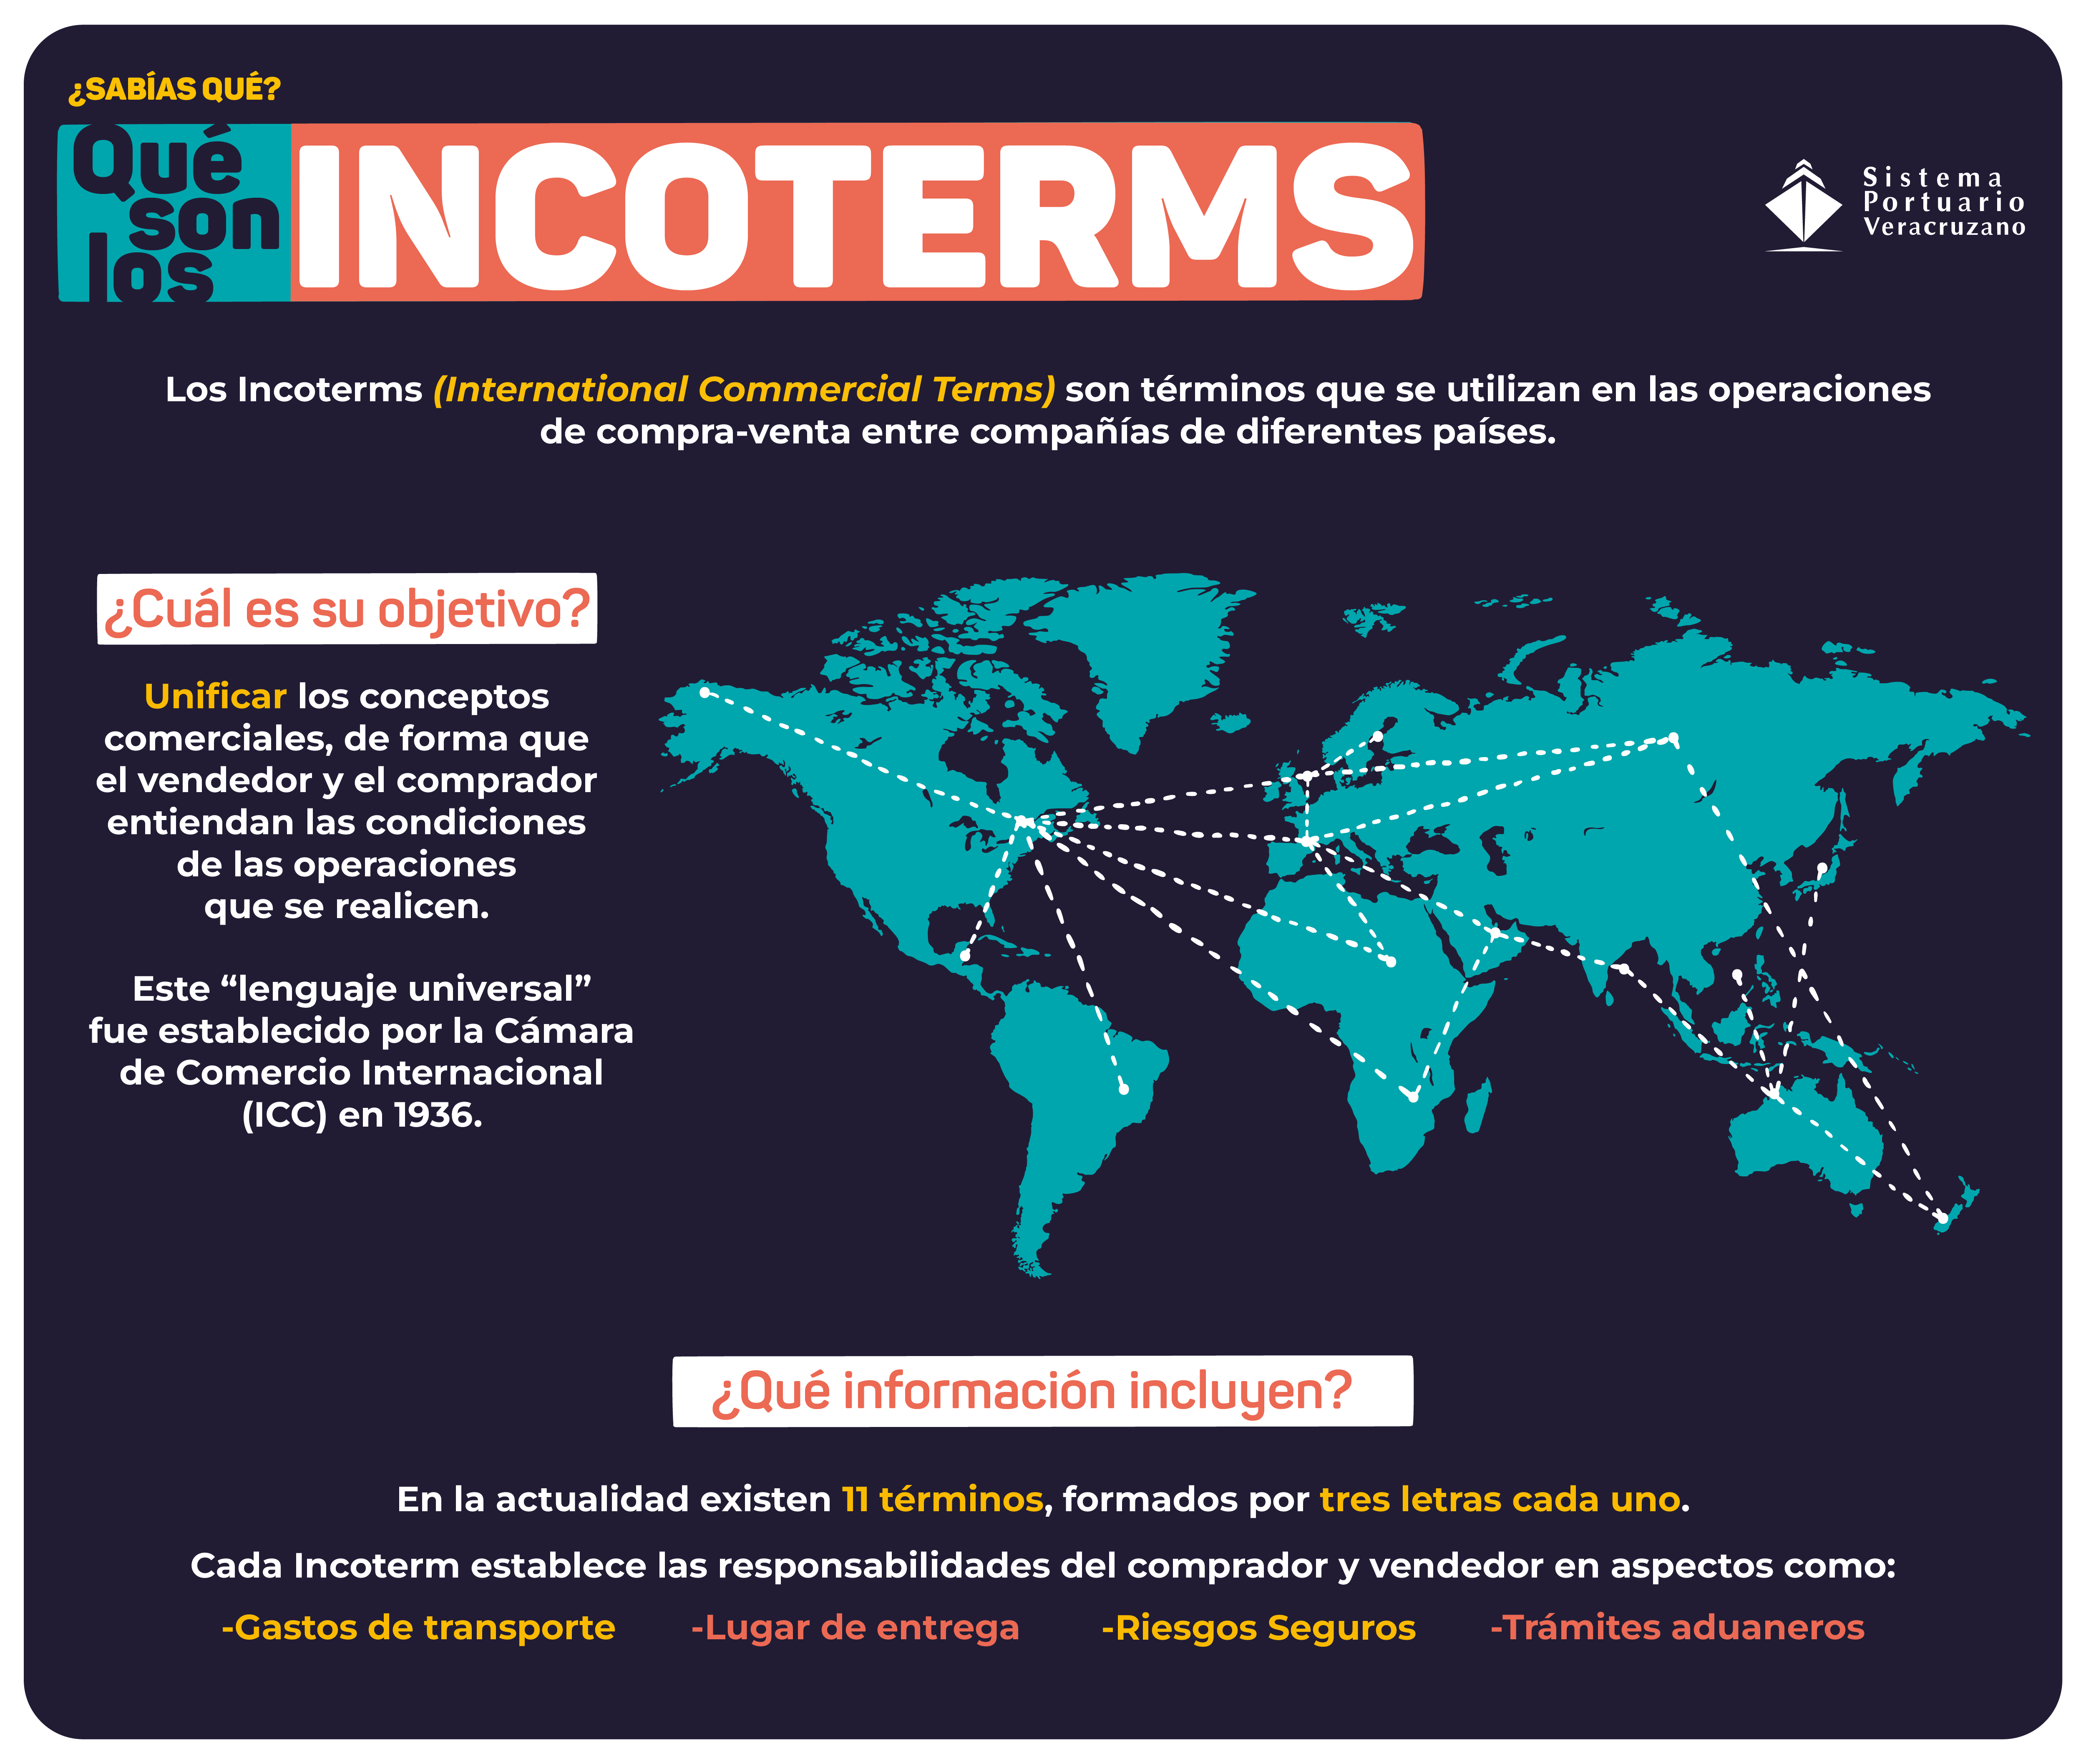 INCOTERMS-01